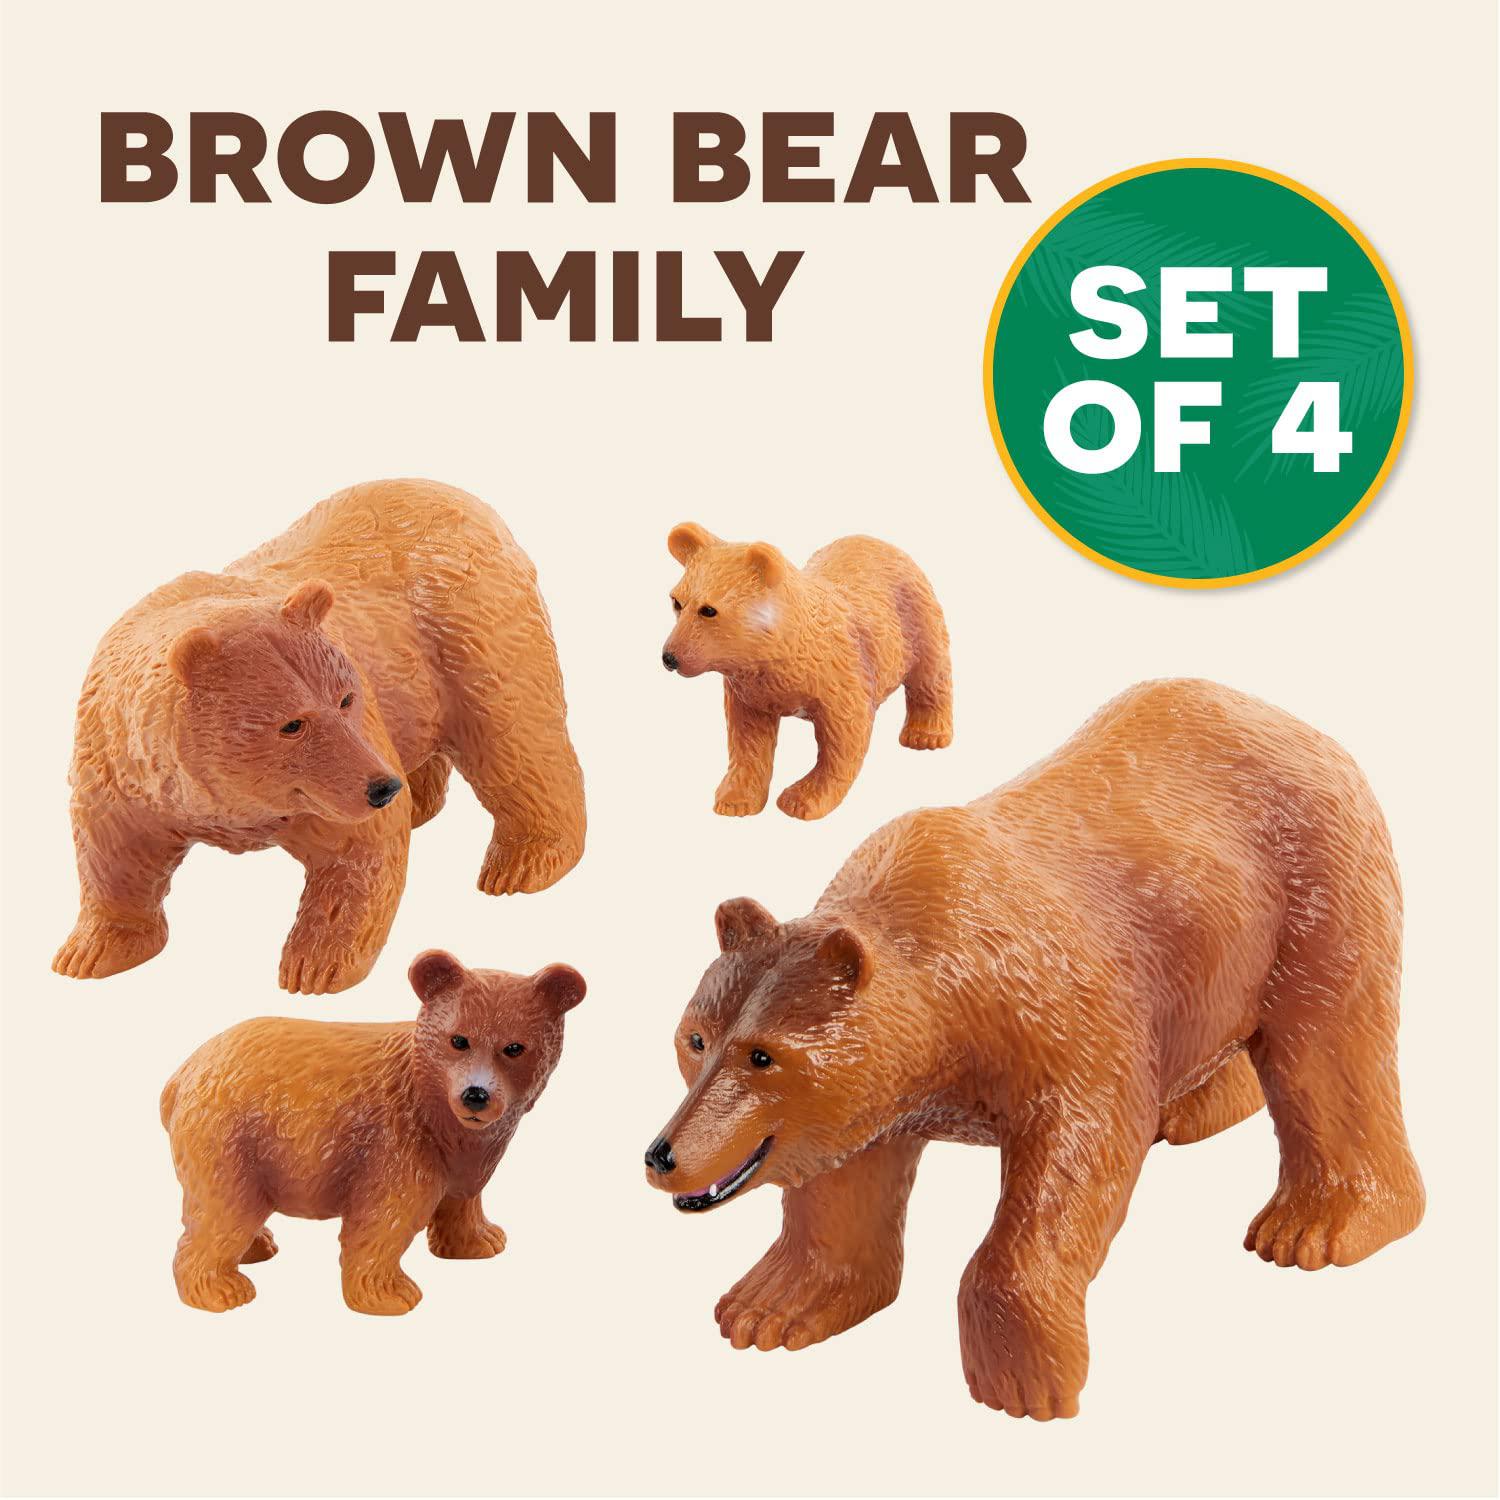 terra by battat b brown bear family - small brown bear animal figures for kids 3-years-old & up (4 pc)